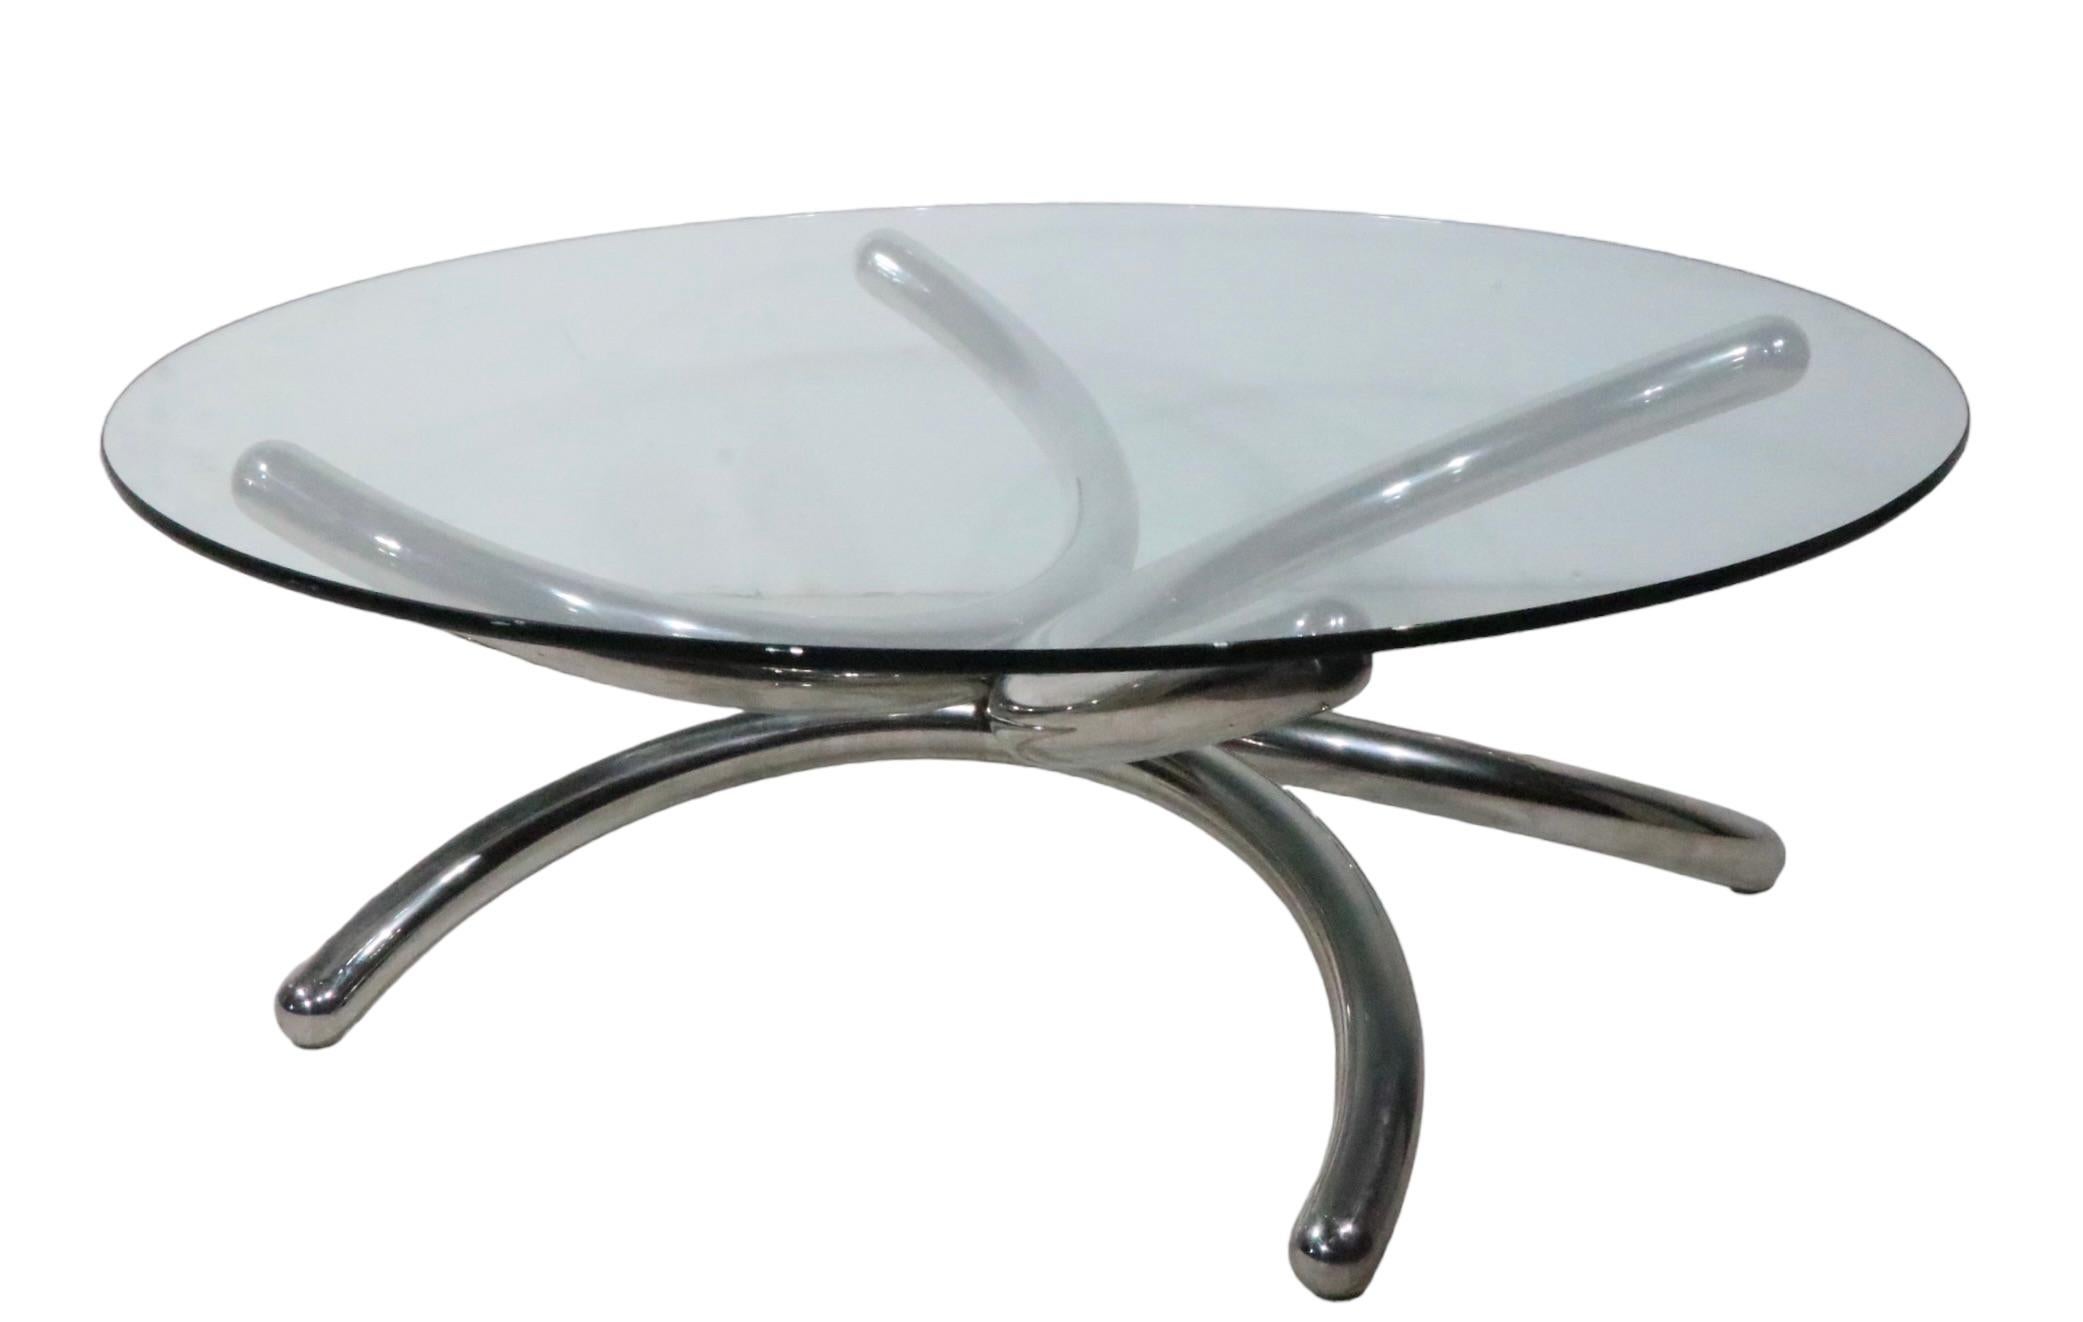  Round Chrome and Glass Coffee Cocktail Table c 1960/70s possibly Paul Tuttle  For Sale 2